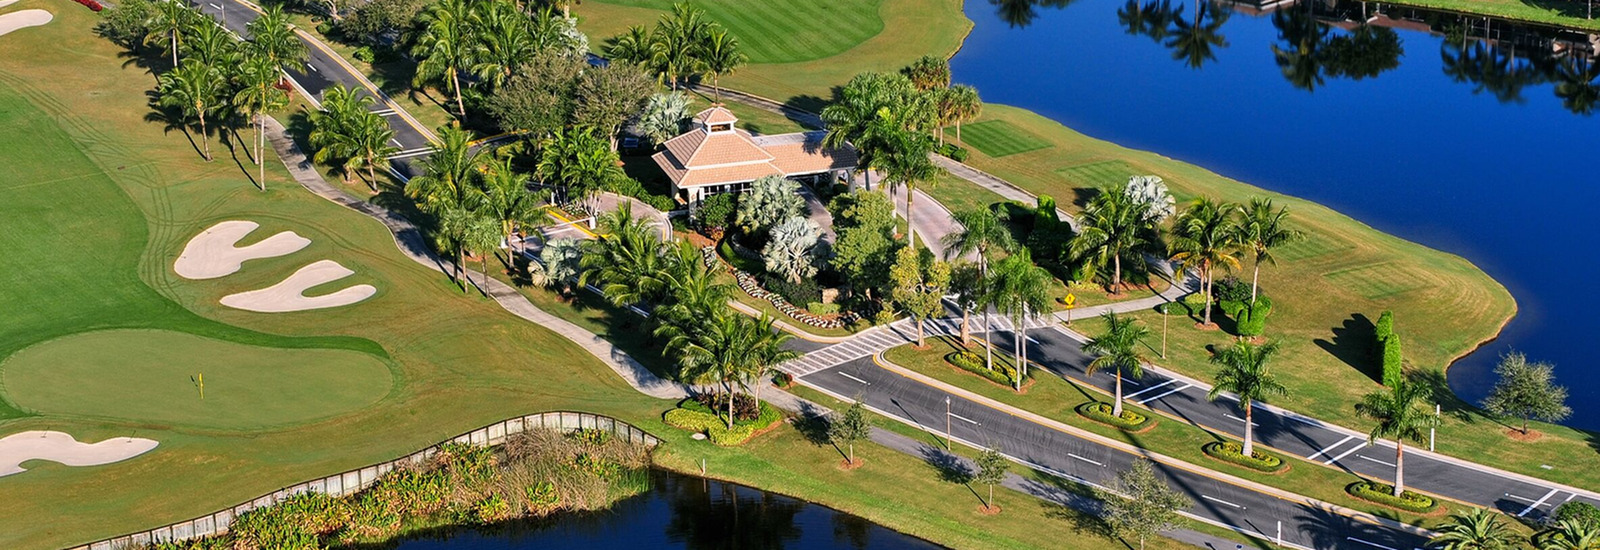 Arial view of florida golf course